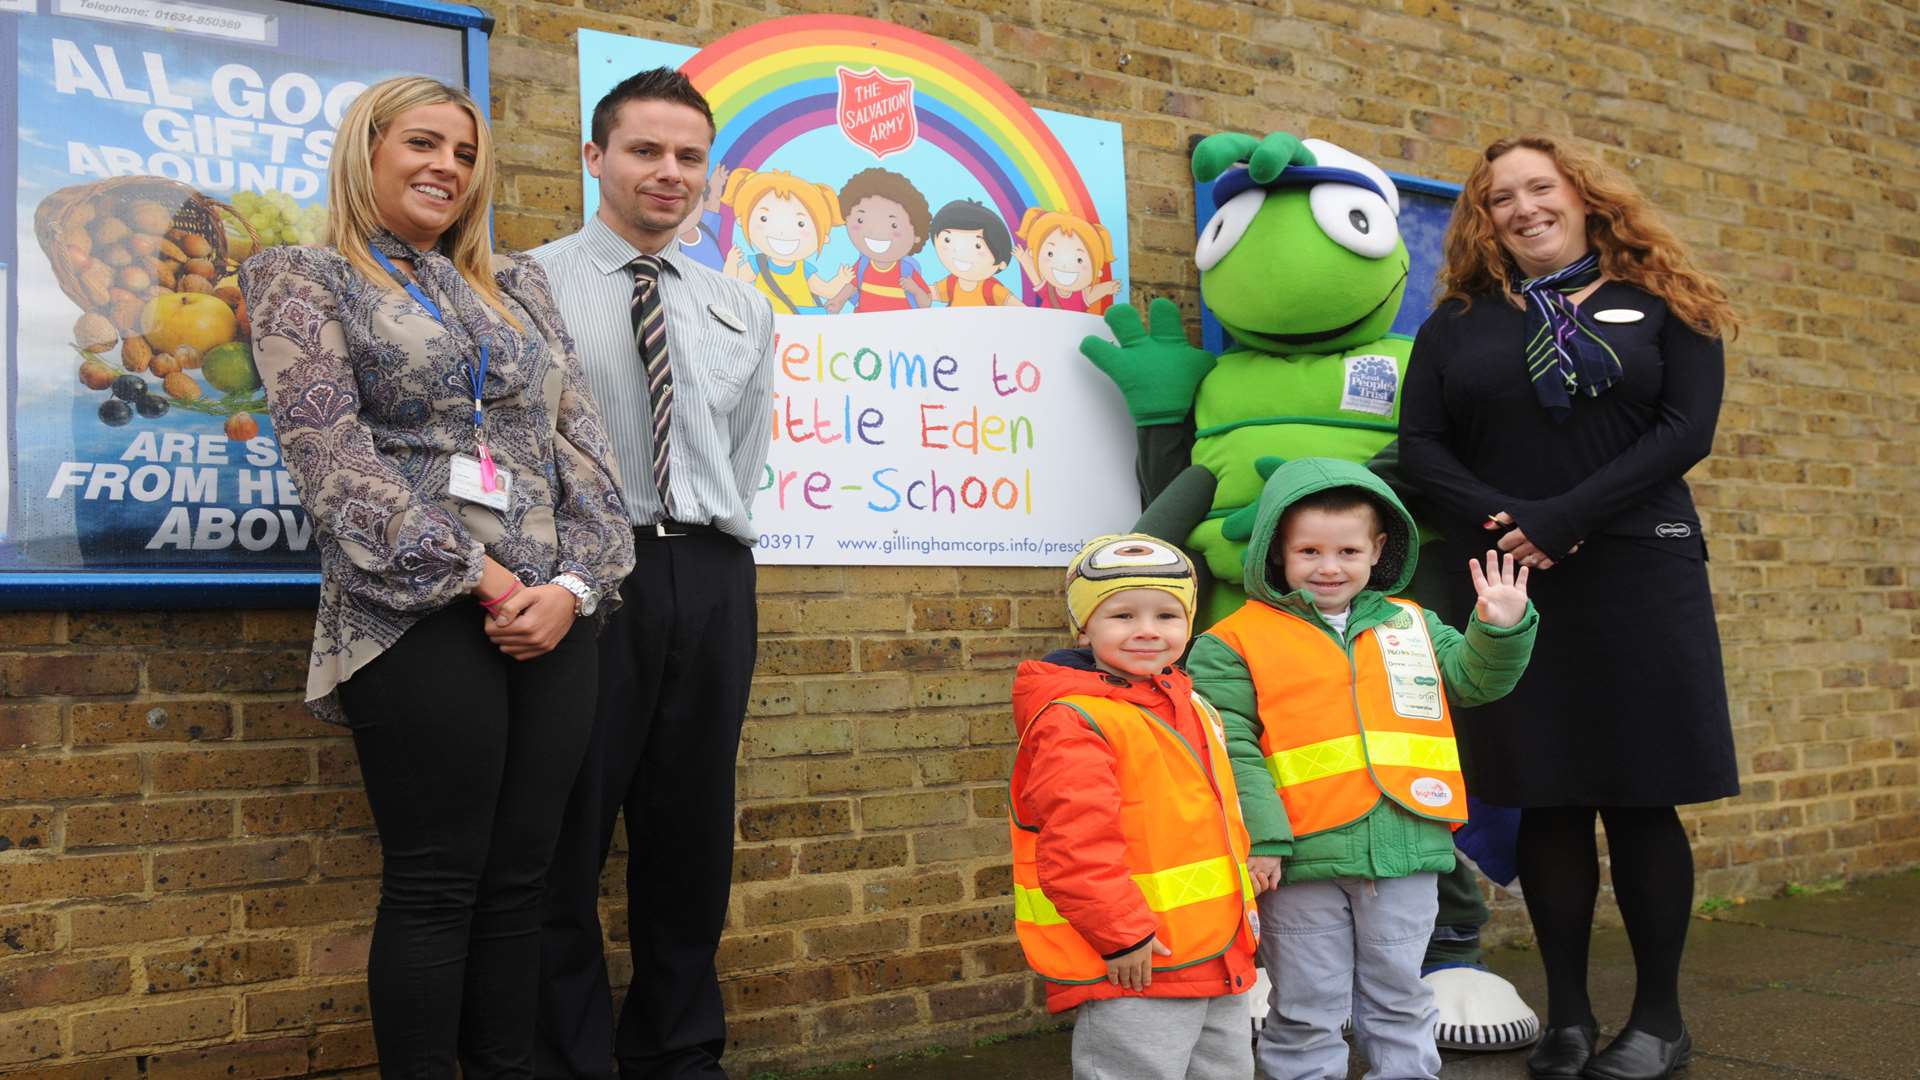 Salvation Army Little Eden Preschool opening and walking bus launch. L-R: Claire Harris (Medway Council), Chris Atkinson (Specsavers), Buster Bug and Joanna Wyndham (Specsavers) with Emilis and Noah (both three).